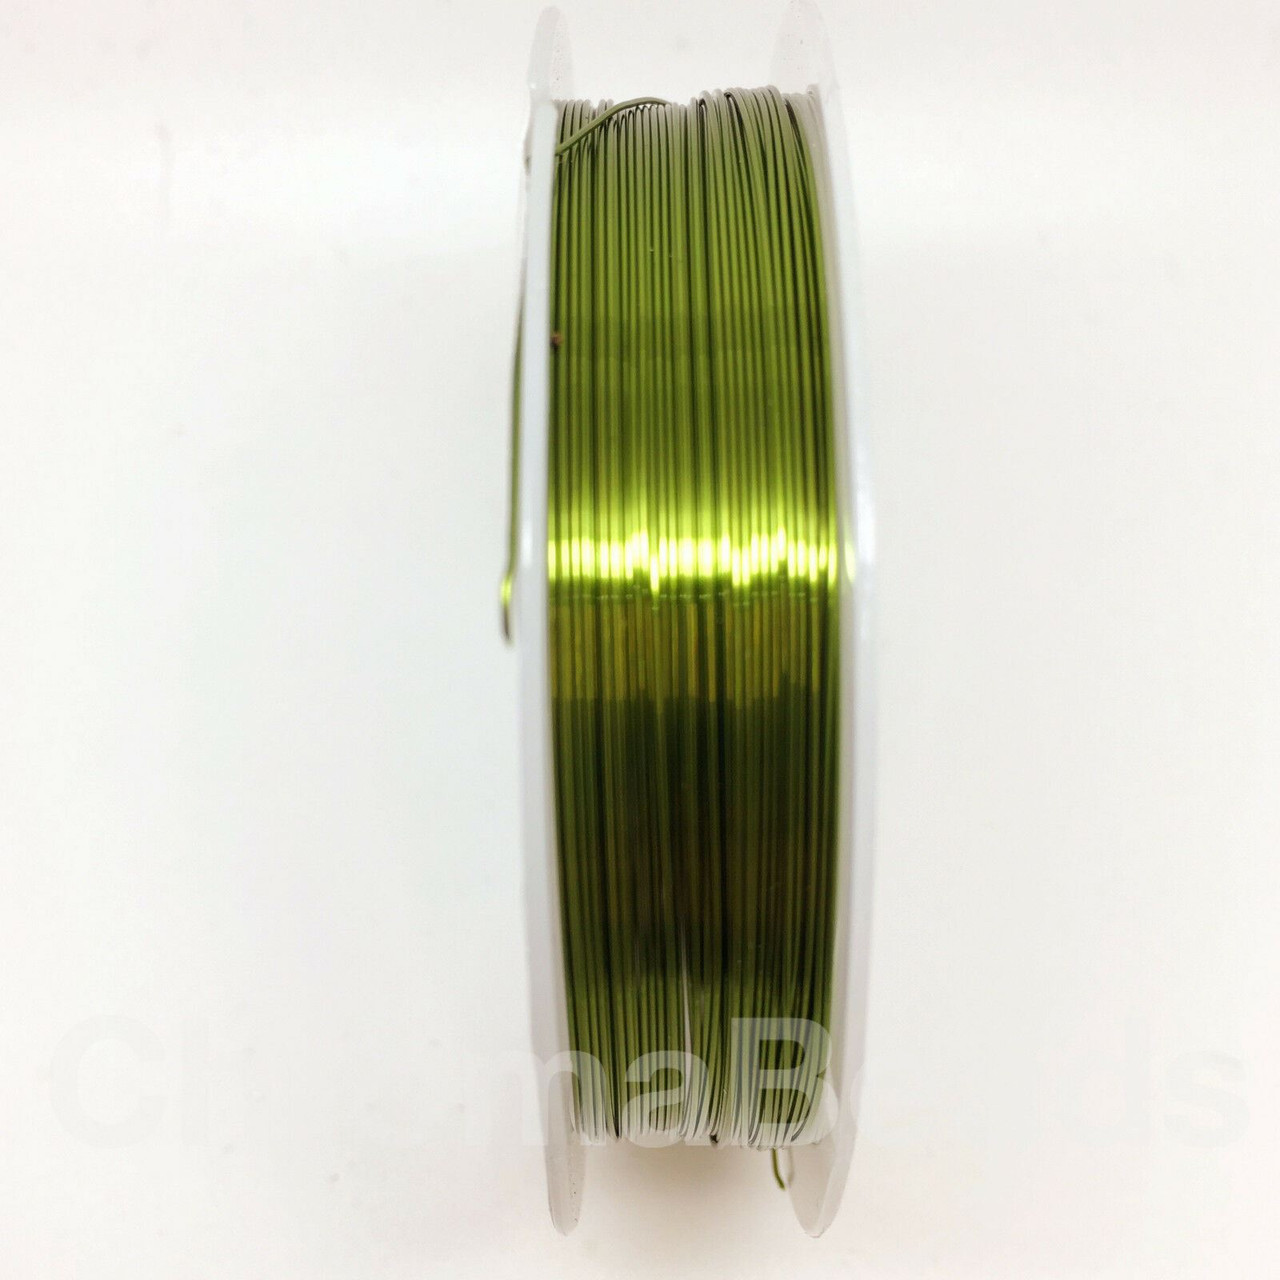 Roll of Copper Wire, 0.5mm thickness, OLIVE GREEN colour, approx 9m length